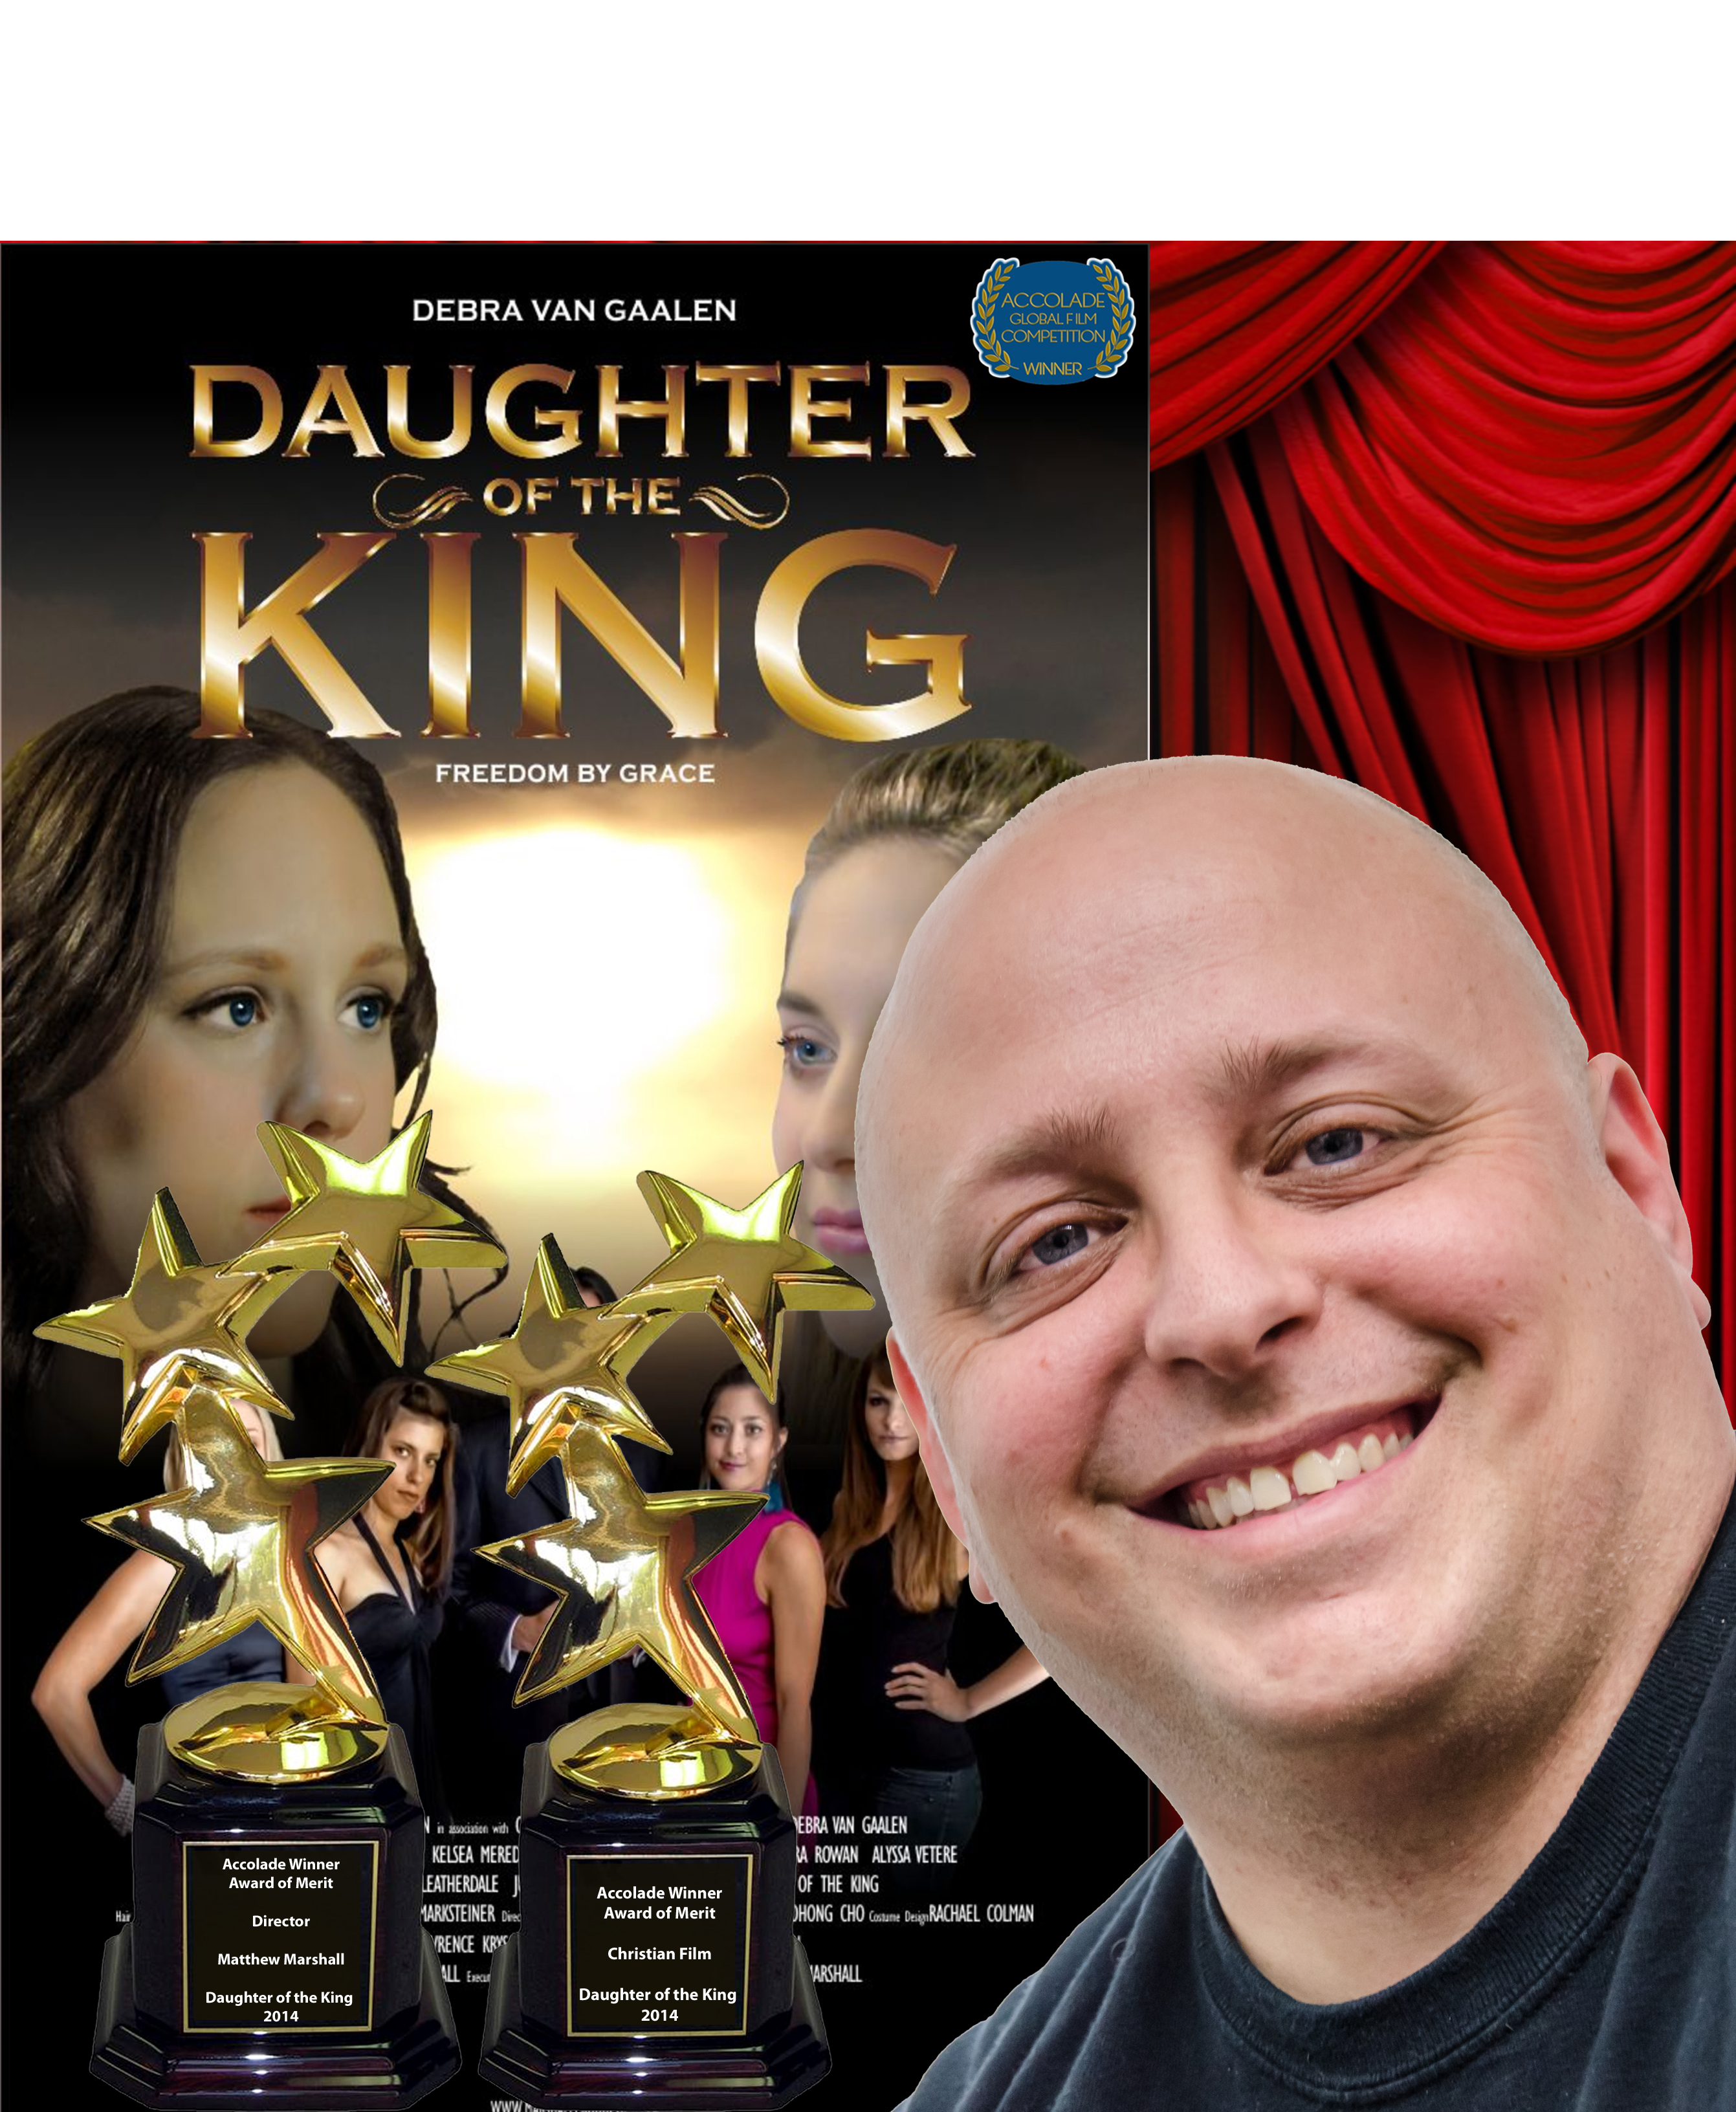 The independent dramatic production Daughter of the King won three Awards at the 2014 Accolade Global Film Competition. The production won an Award of Merit: Christian Film and Matthew Marshall won Award of Merit: Director.